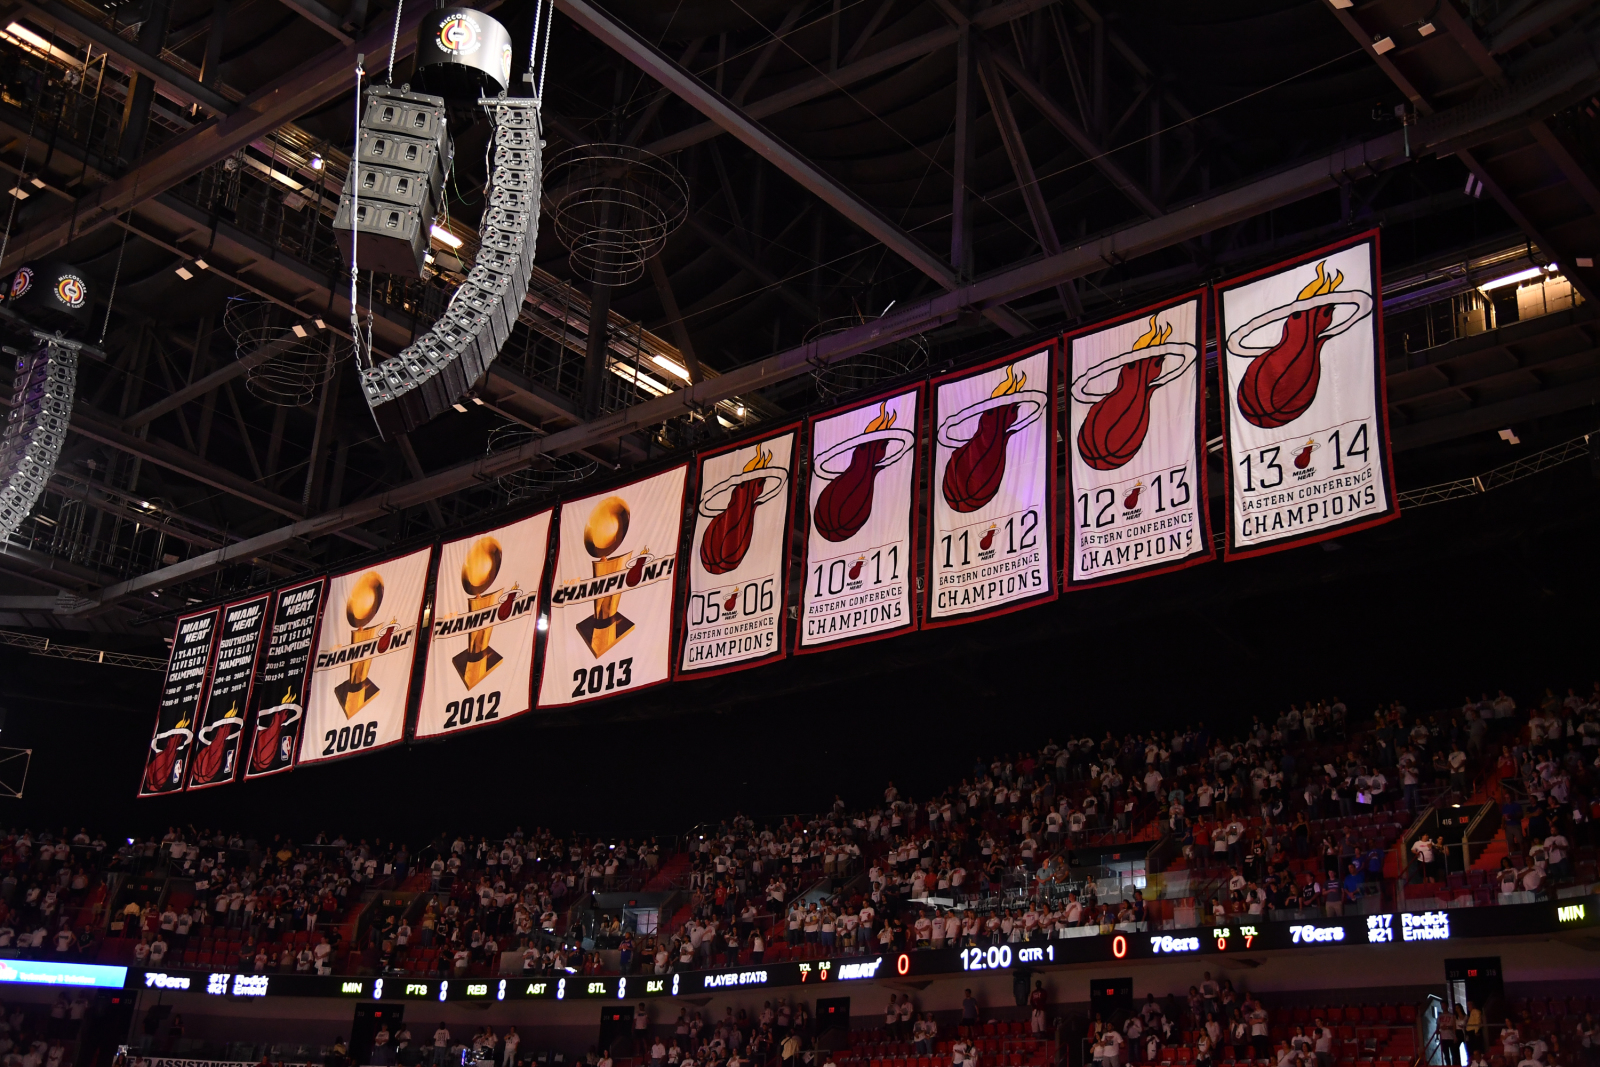 A Miami Heat update on fans at AmericanAirlines Arena